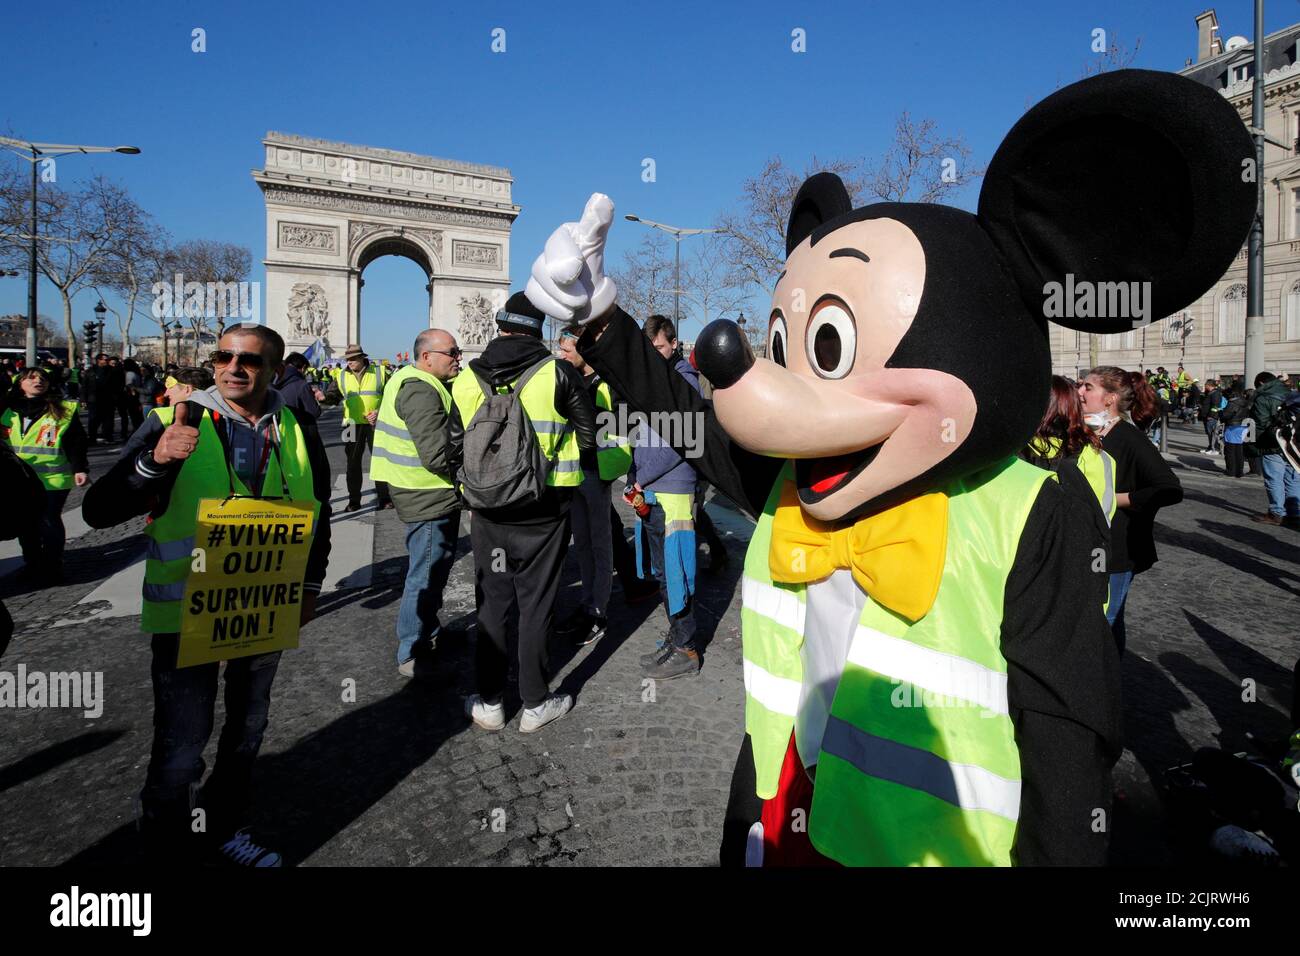 A protester wearing a Mickey Mouse costume reacts on the Champs Elysees  near the Arc de Triomphe during a demonstration by the "yellow vests"  movement in Paris, France, February 23, 2019. REUTERS/Philippe